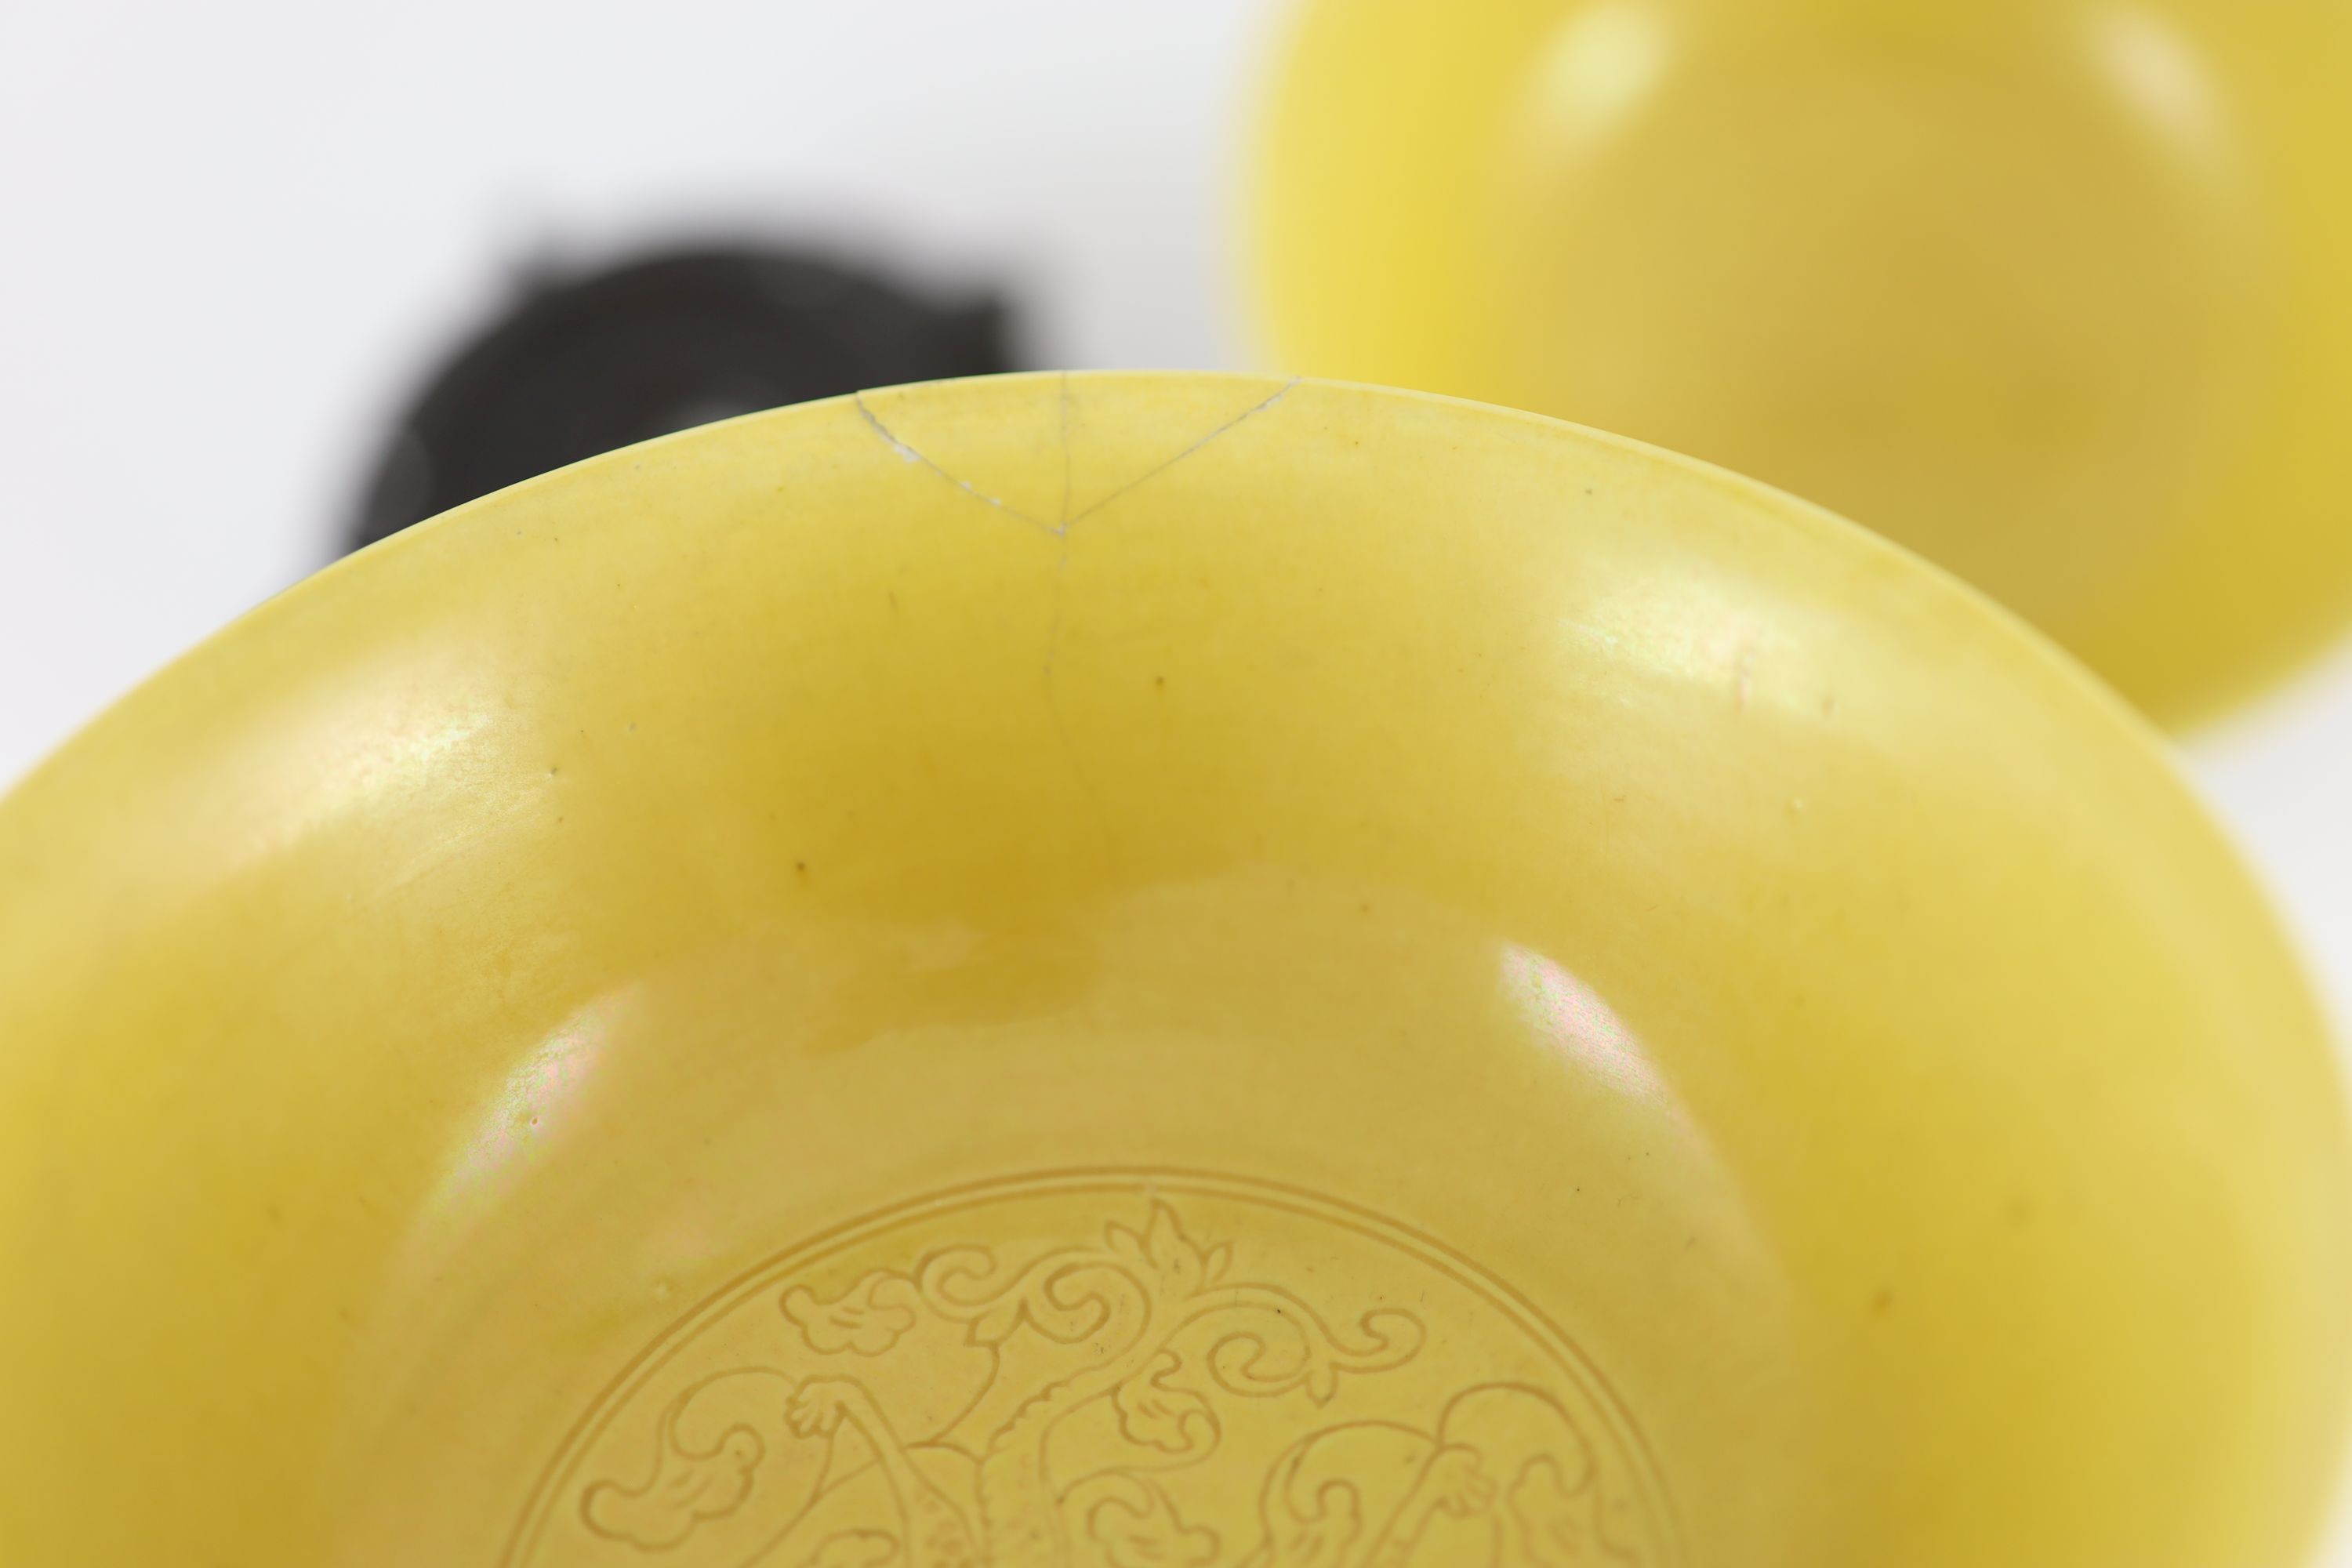 A pair of Chinese yellow ground sgraffito bowls, Kangxi mark but mid 20th century,